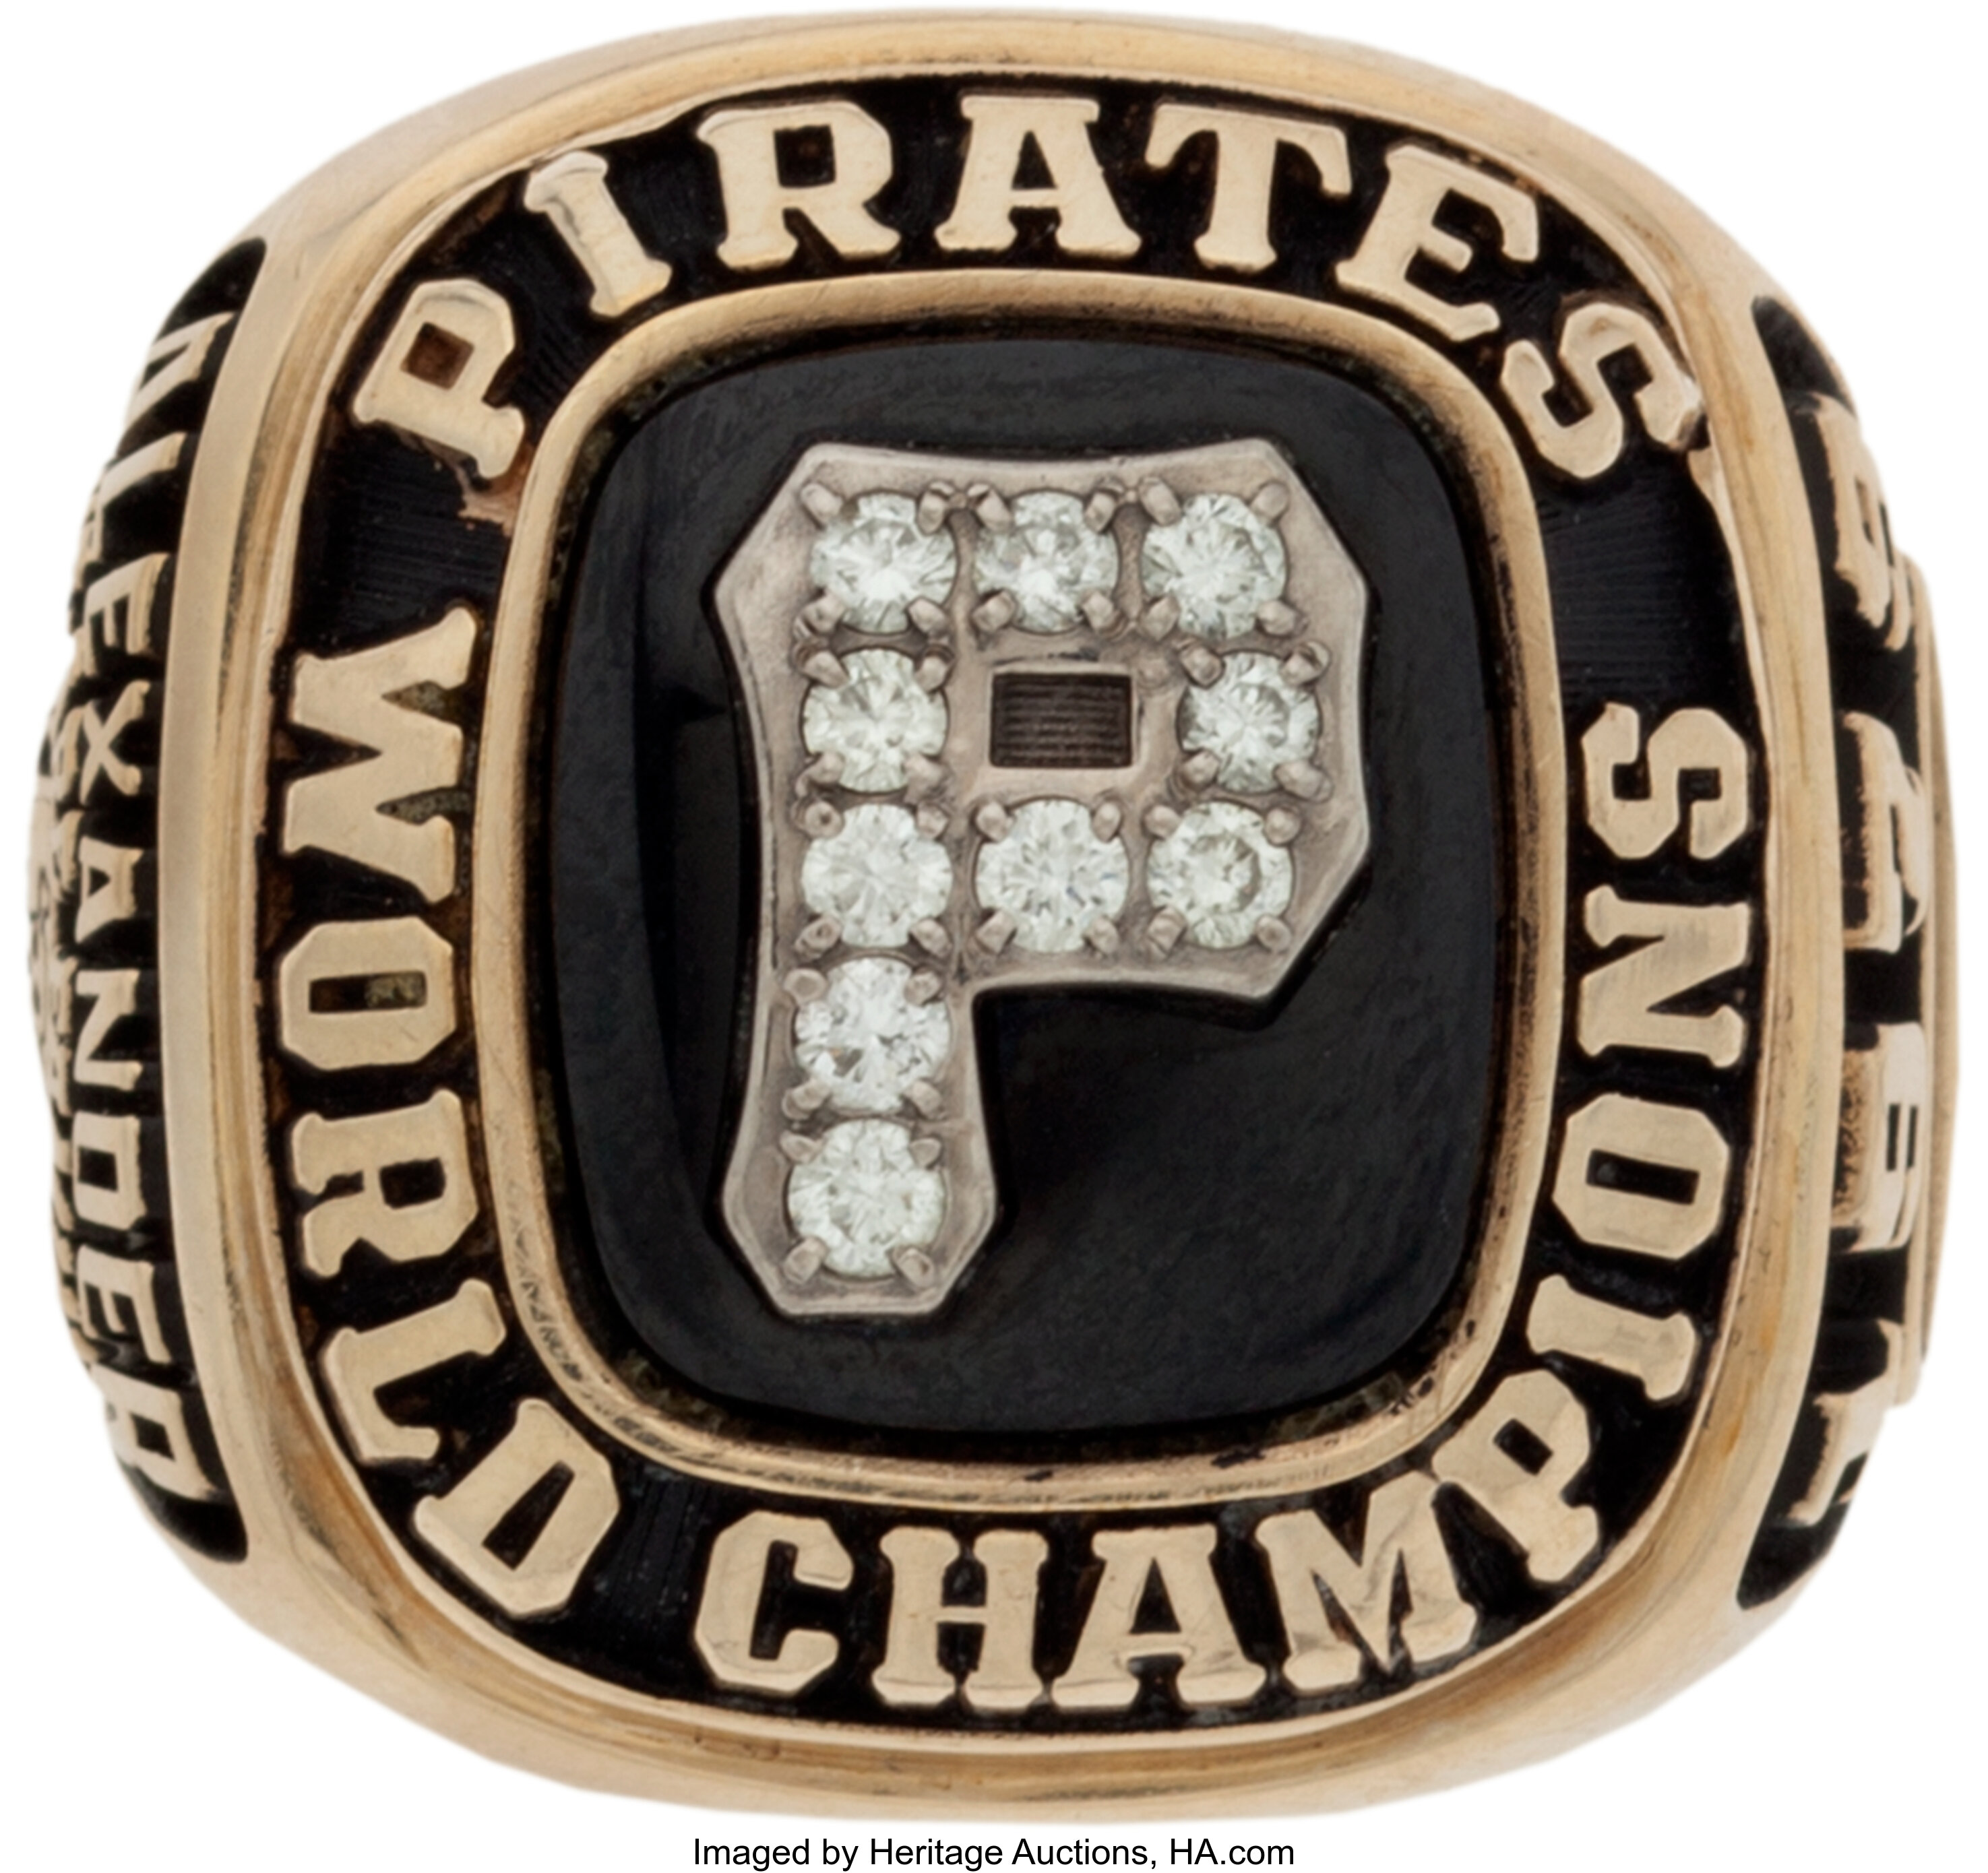 Pittsburgh Pirates 1925 World Series Championship Patch – The